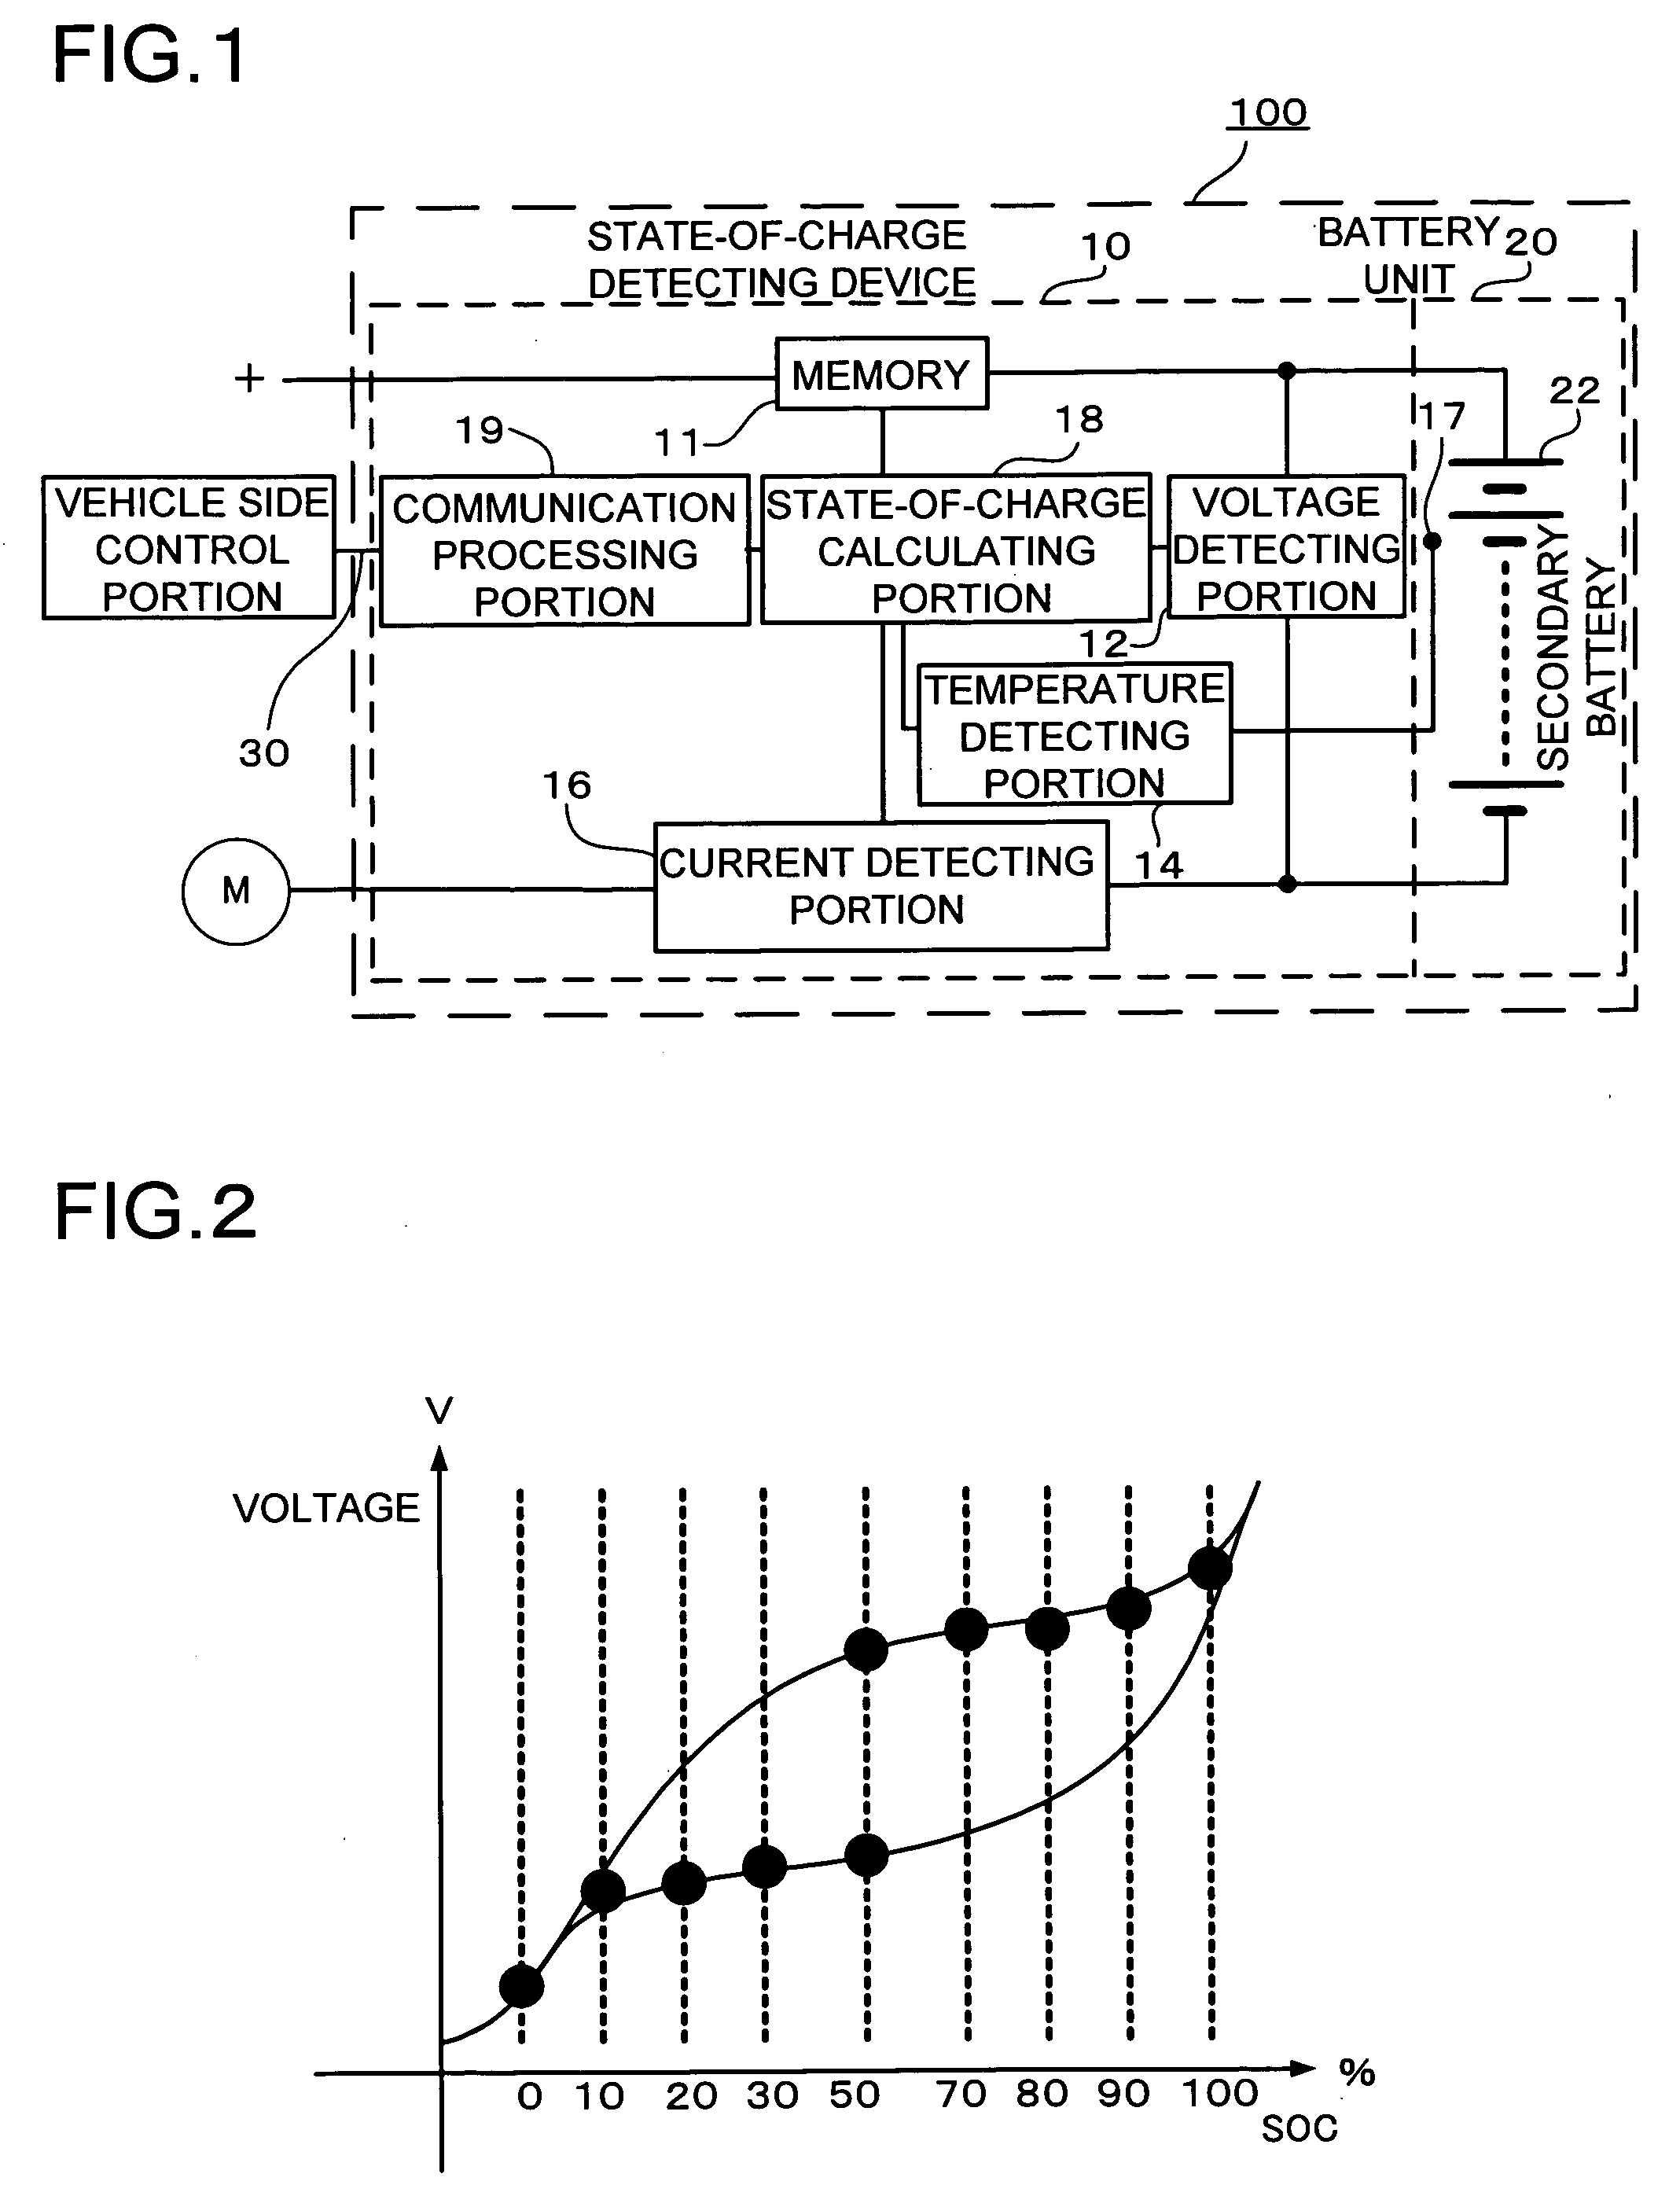 Method of detecting state-of-charge of battery and power device